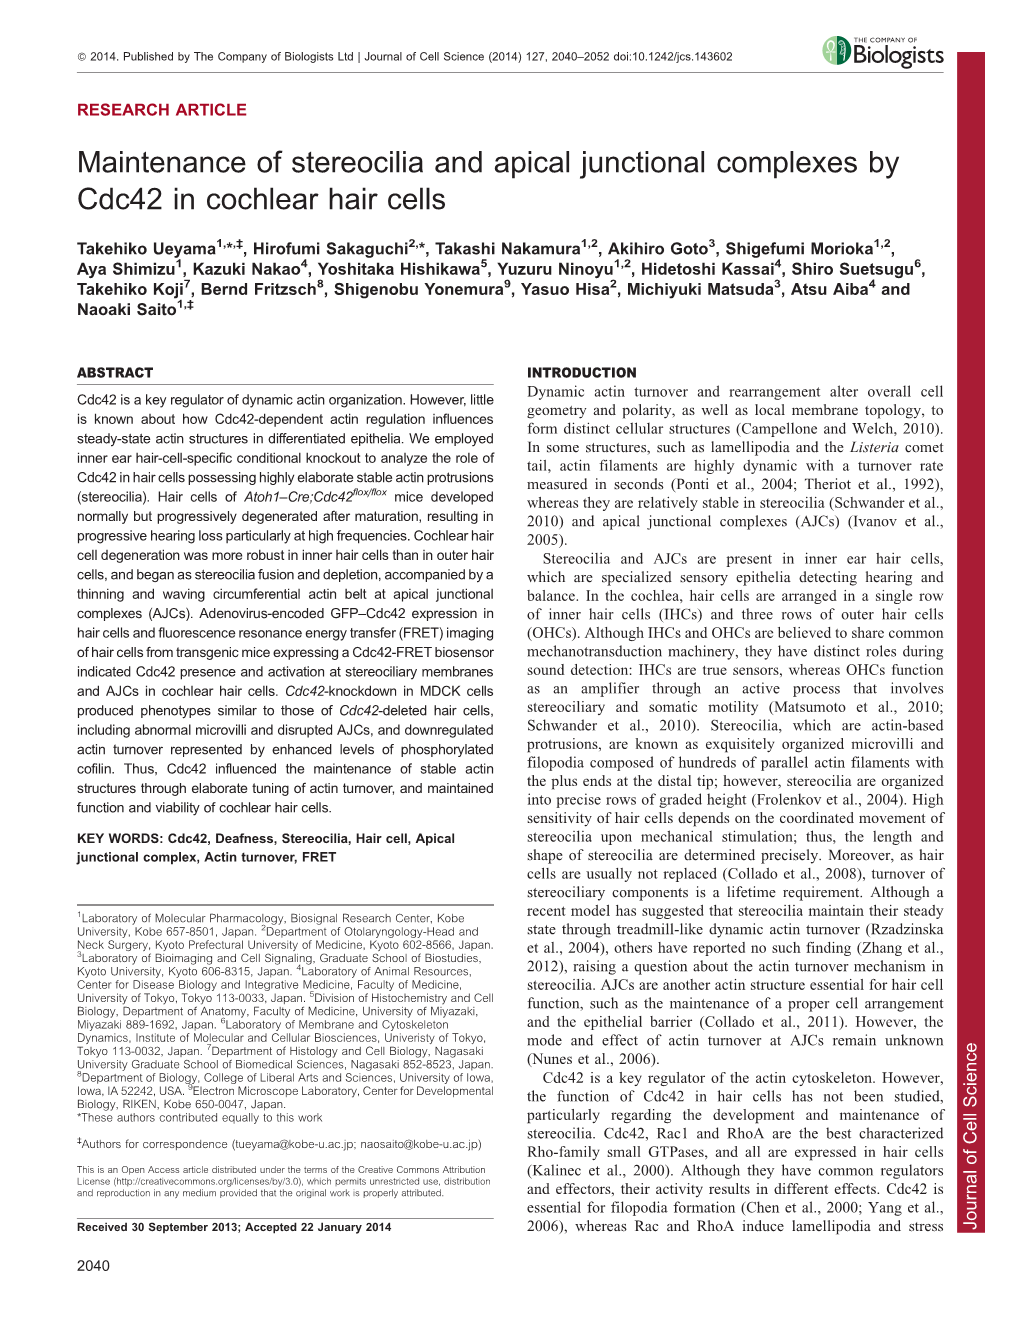 Maintenance of Stereocilia and Apical Junctional Complexes by Cdc42 In